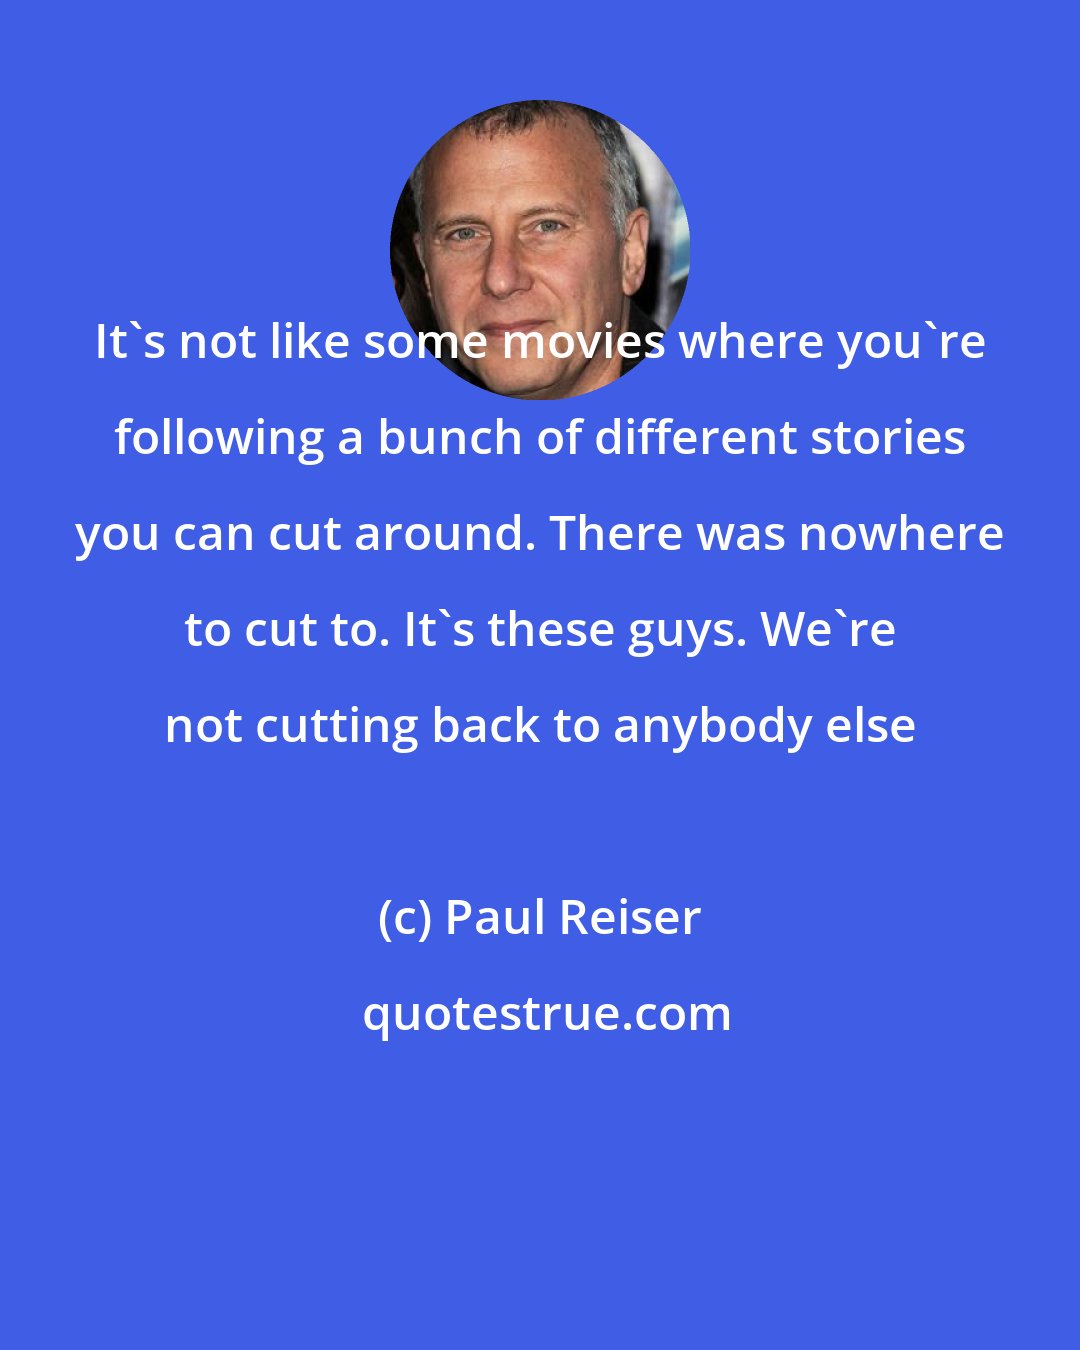 Paul Reiser: It's not like some movies where you're following a bunch of different stories you can cut around. There was nowhere to cut to. It's these guys. We're not cutting back to anybody else